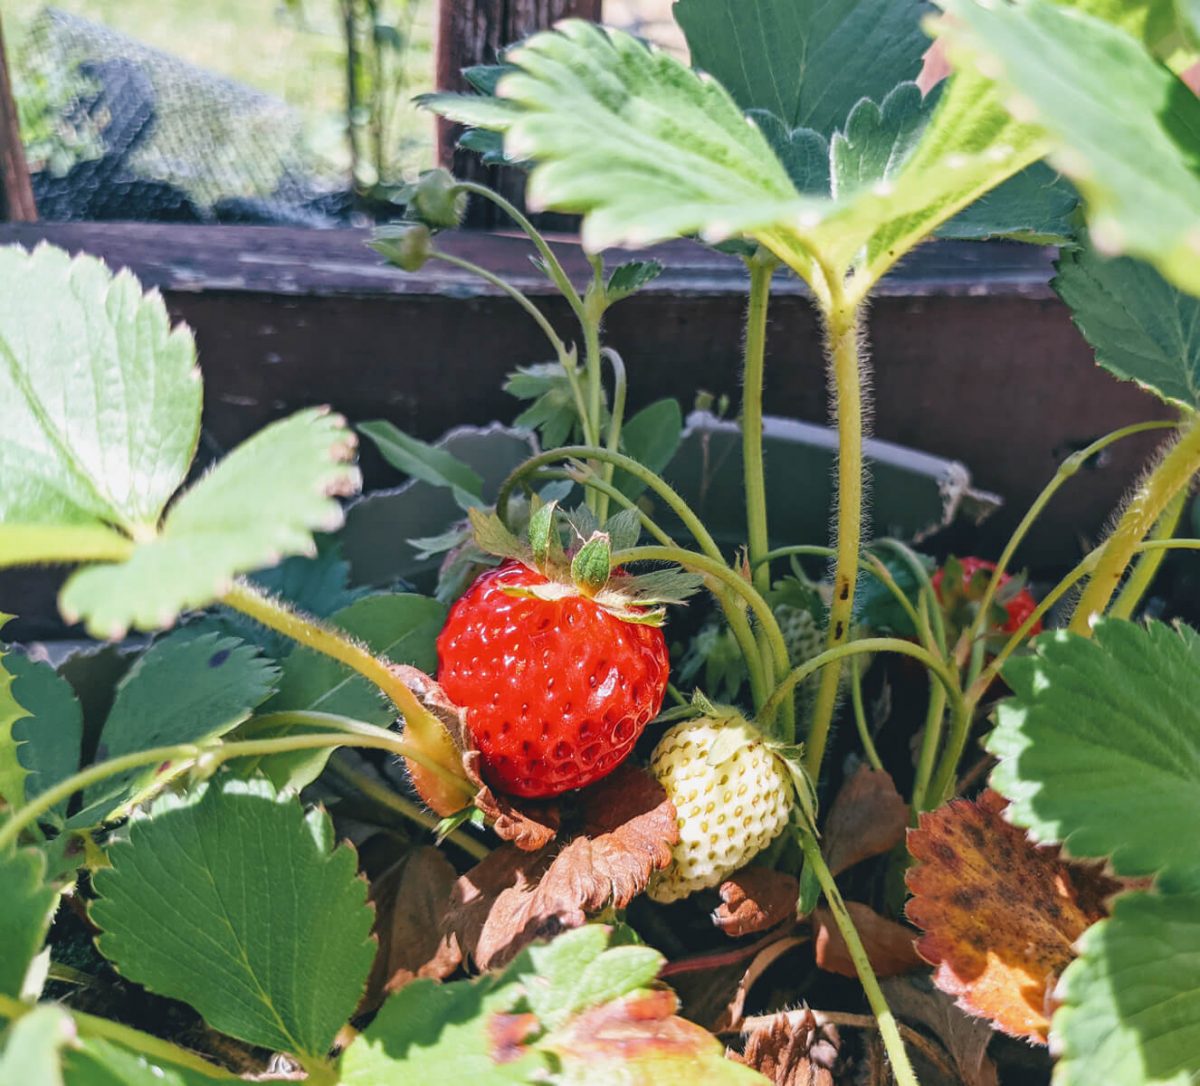 Companion Plants for Strawberries - Bright Red, Juicy Strawberry in Container